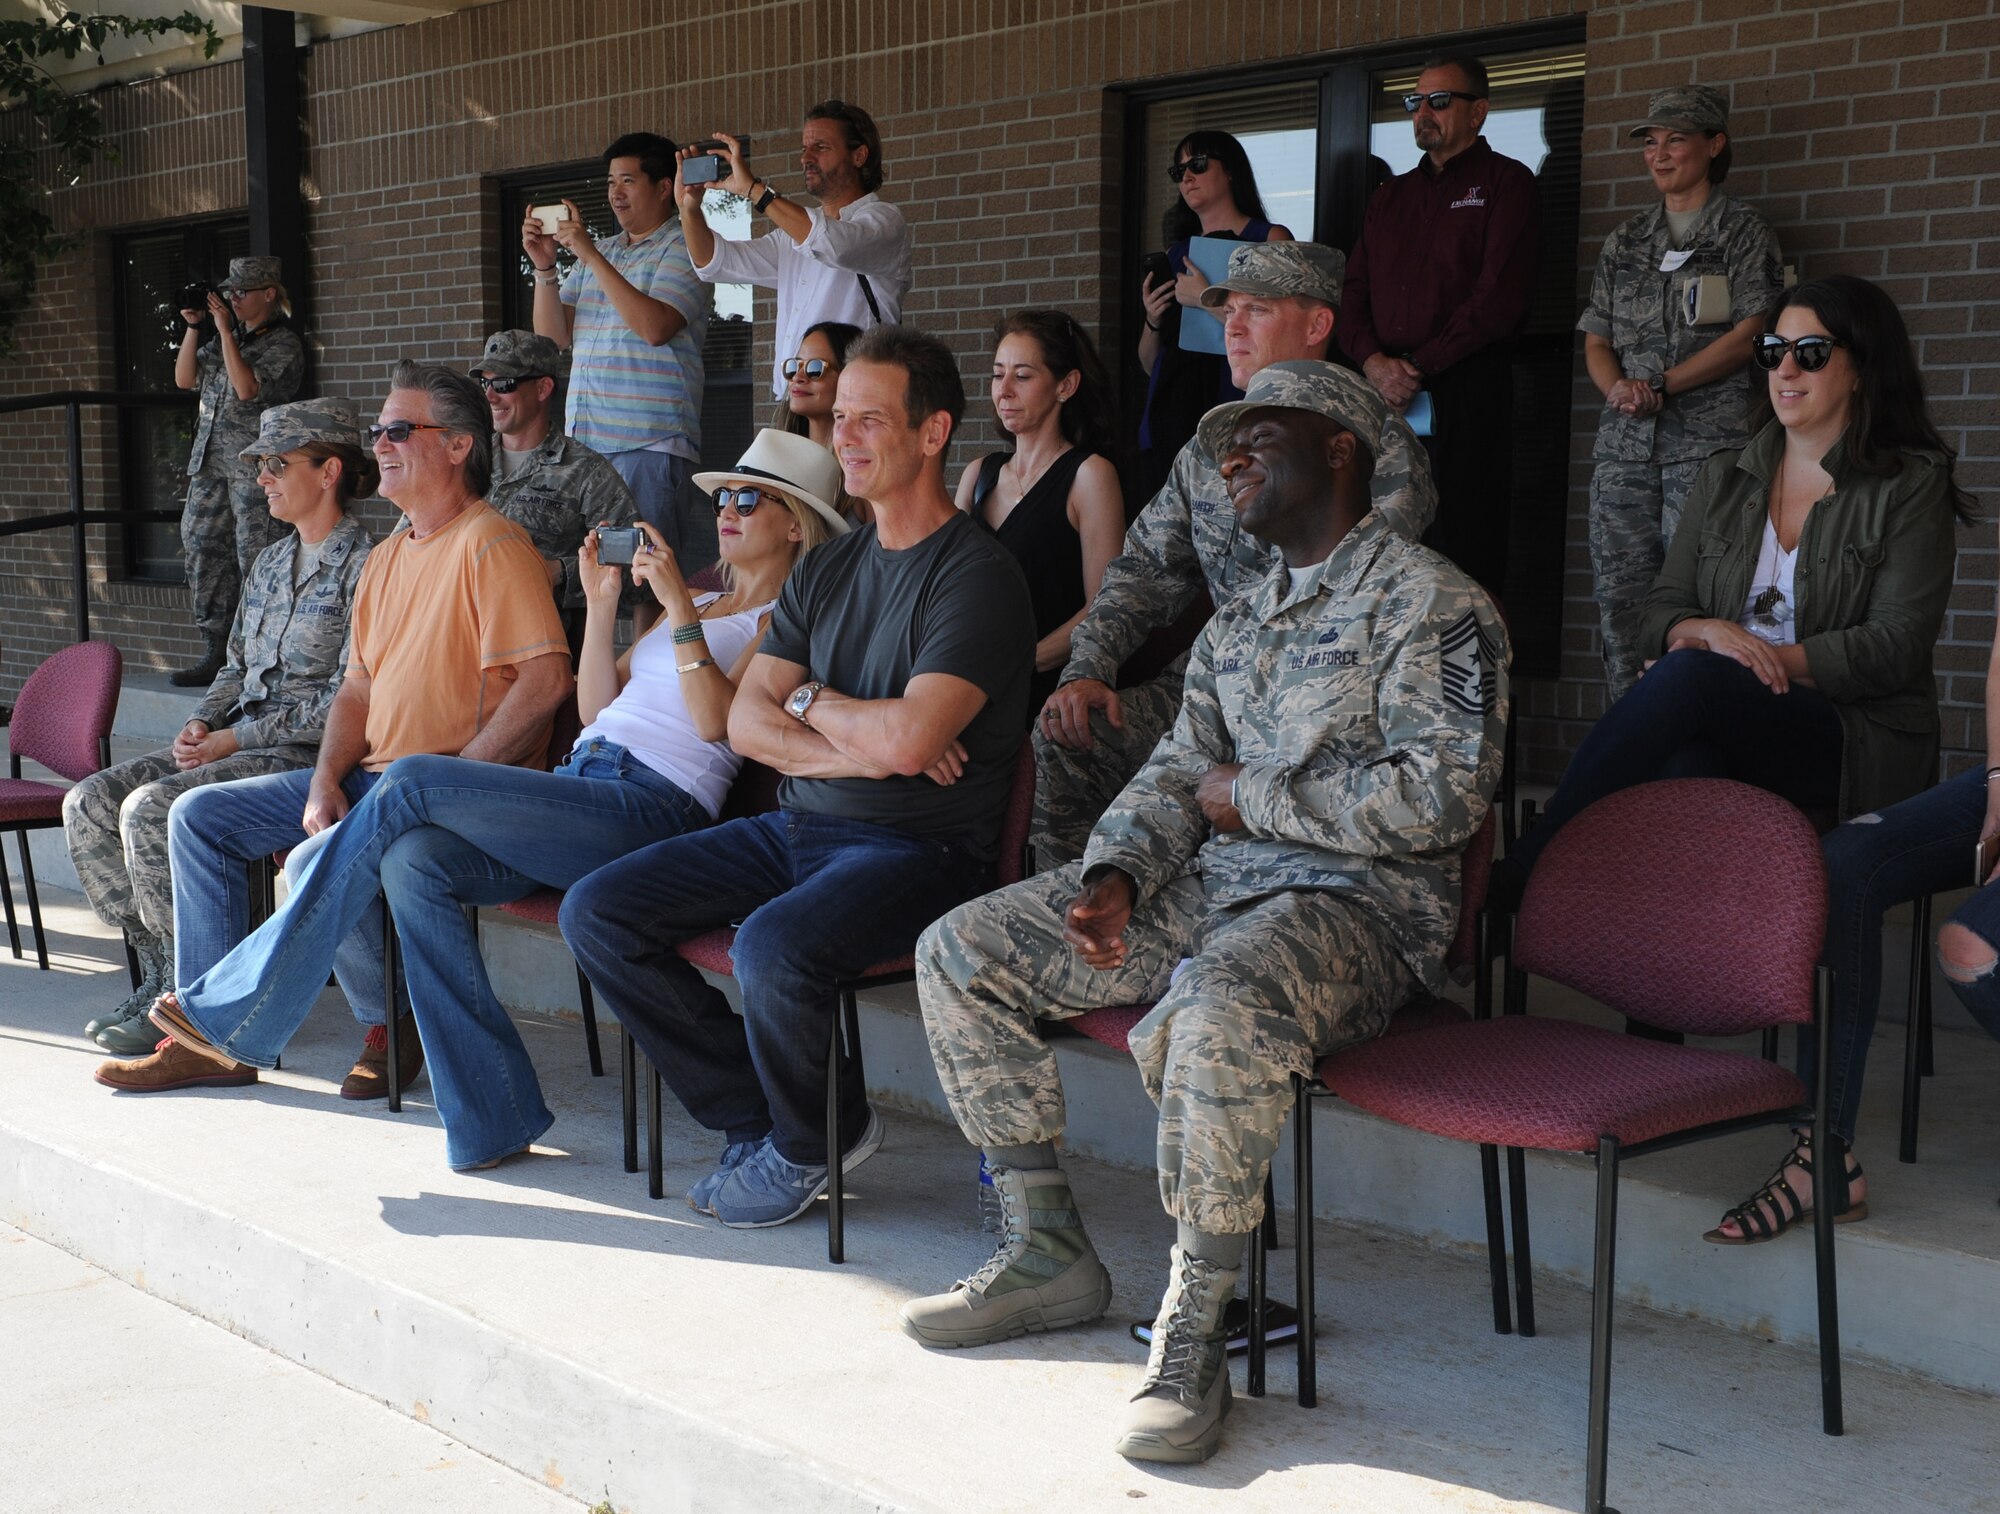 Kurt Russell, Kate Hudson, Deepwater Horizon actors, and Peter Berg, Deepwater Horizon director, watch a 336th Training Squadron drill down demonstration at the Levitow Training Support Facility drill pad before the Deepwater Horizon movie screening Sept. 20, 2016, on Keesler Air Force Base, Miss. Before the screening, Russell, Hudson and Berg, took a short tour of the 81st Training Wing and 403rd Wing to meet with Airmen and learn about their missions at Keesler. (U.S. Air Force photo by Kemberly Groue/Released)